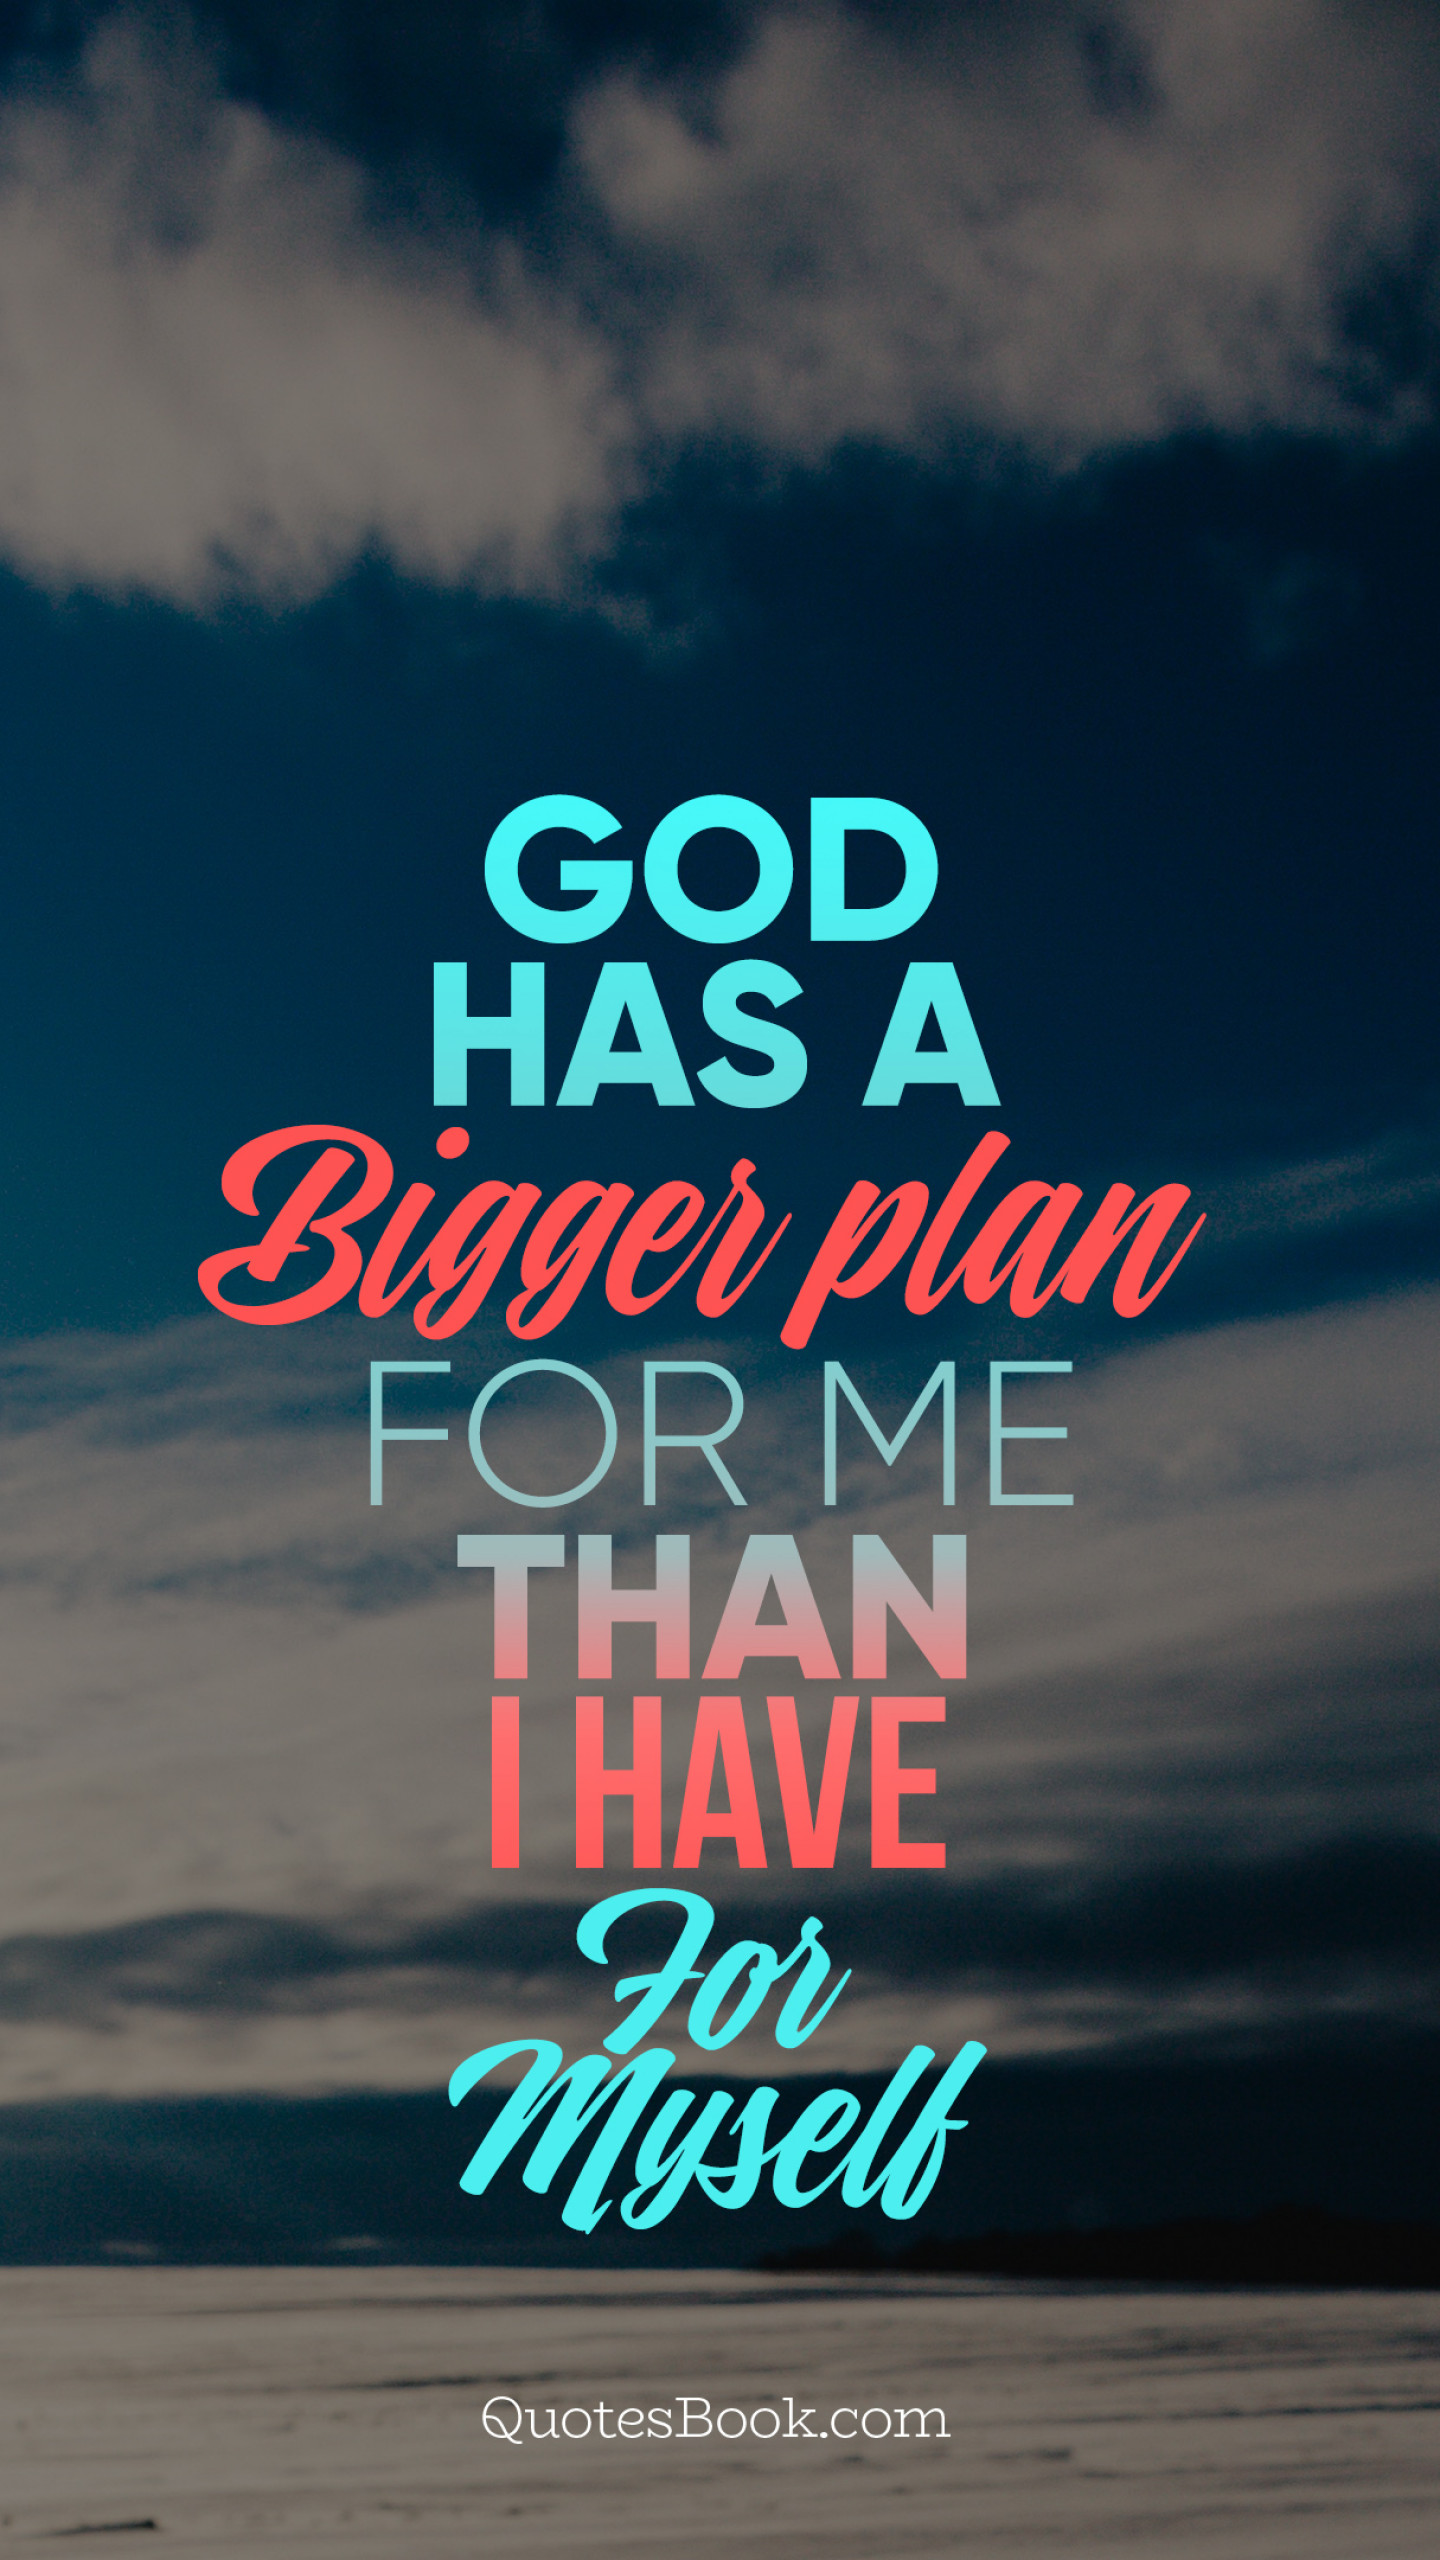 God has a bigger plan for me than I have for myself - QuotesBook